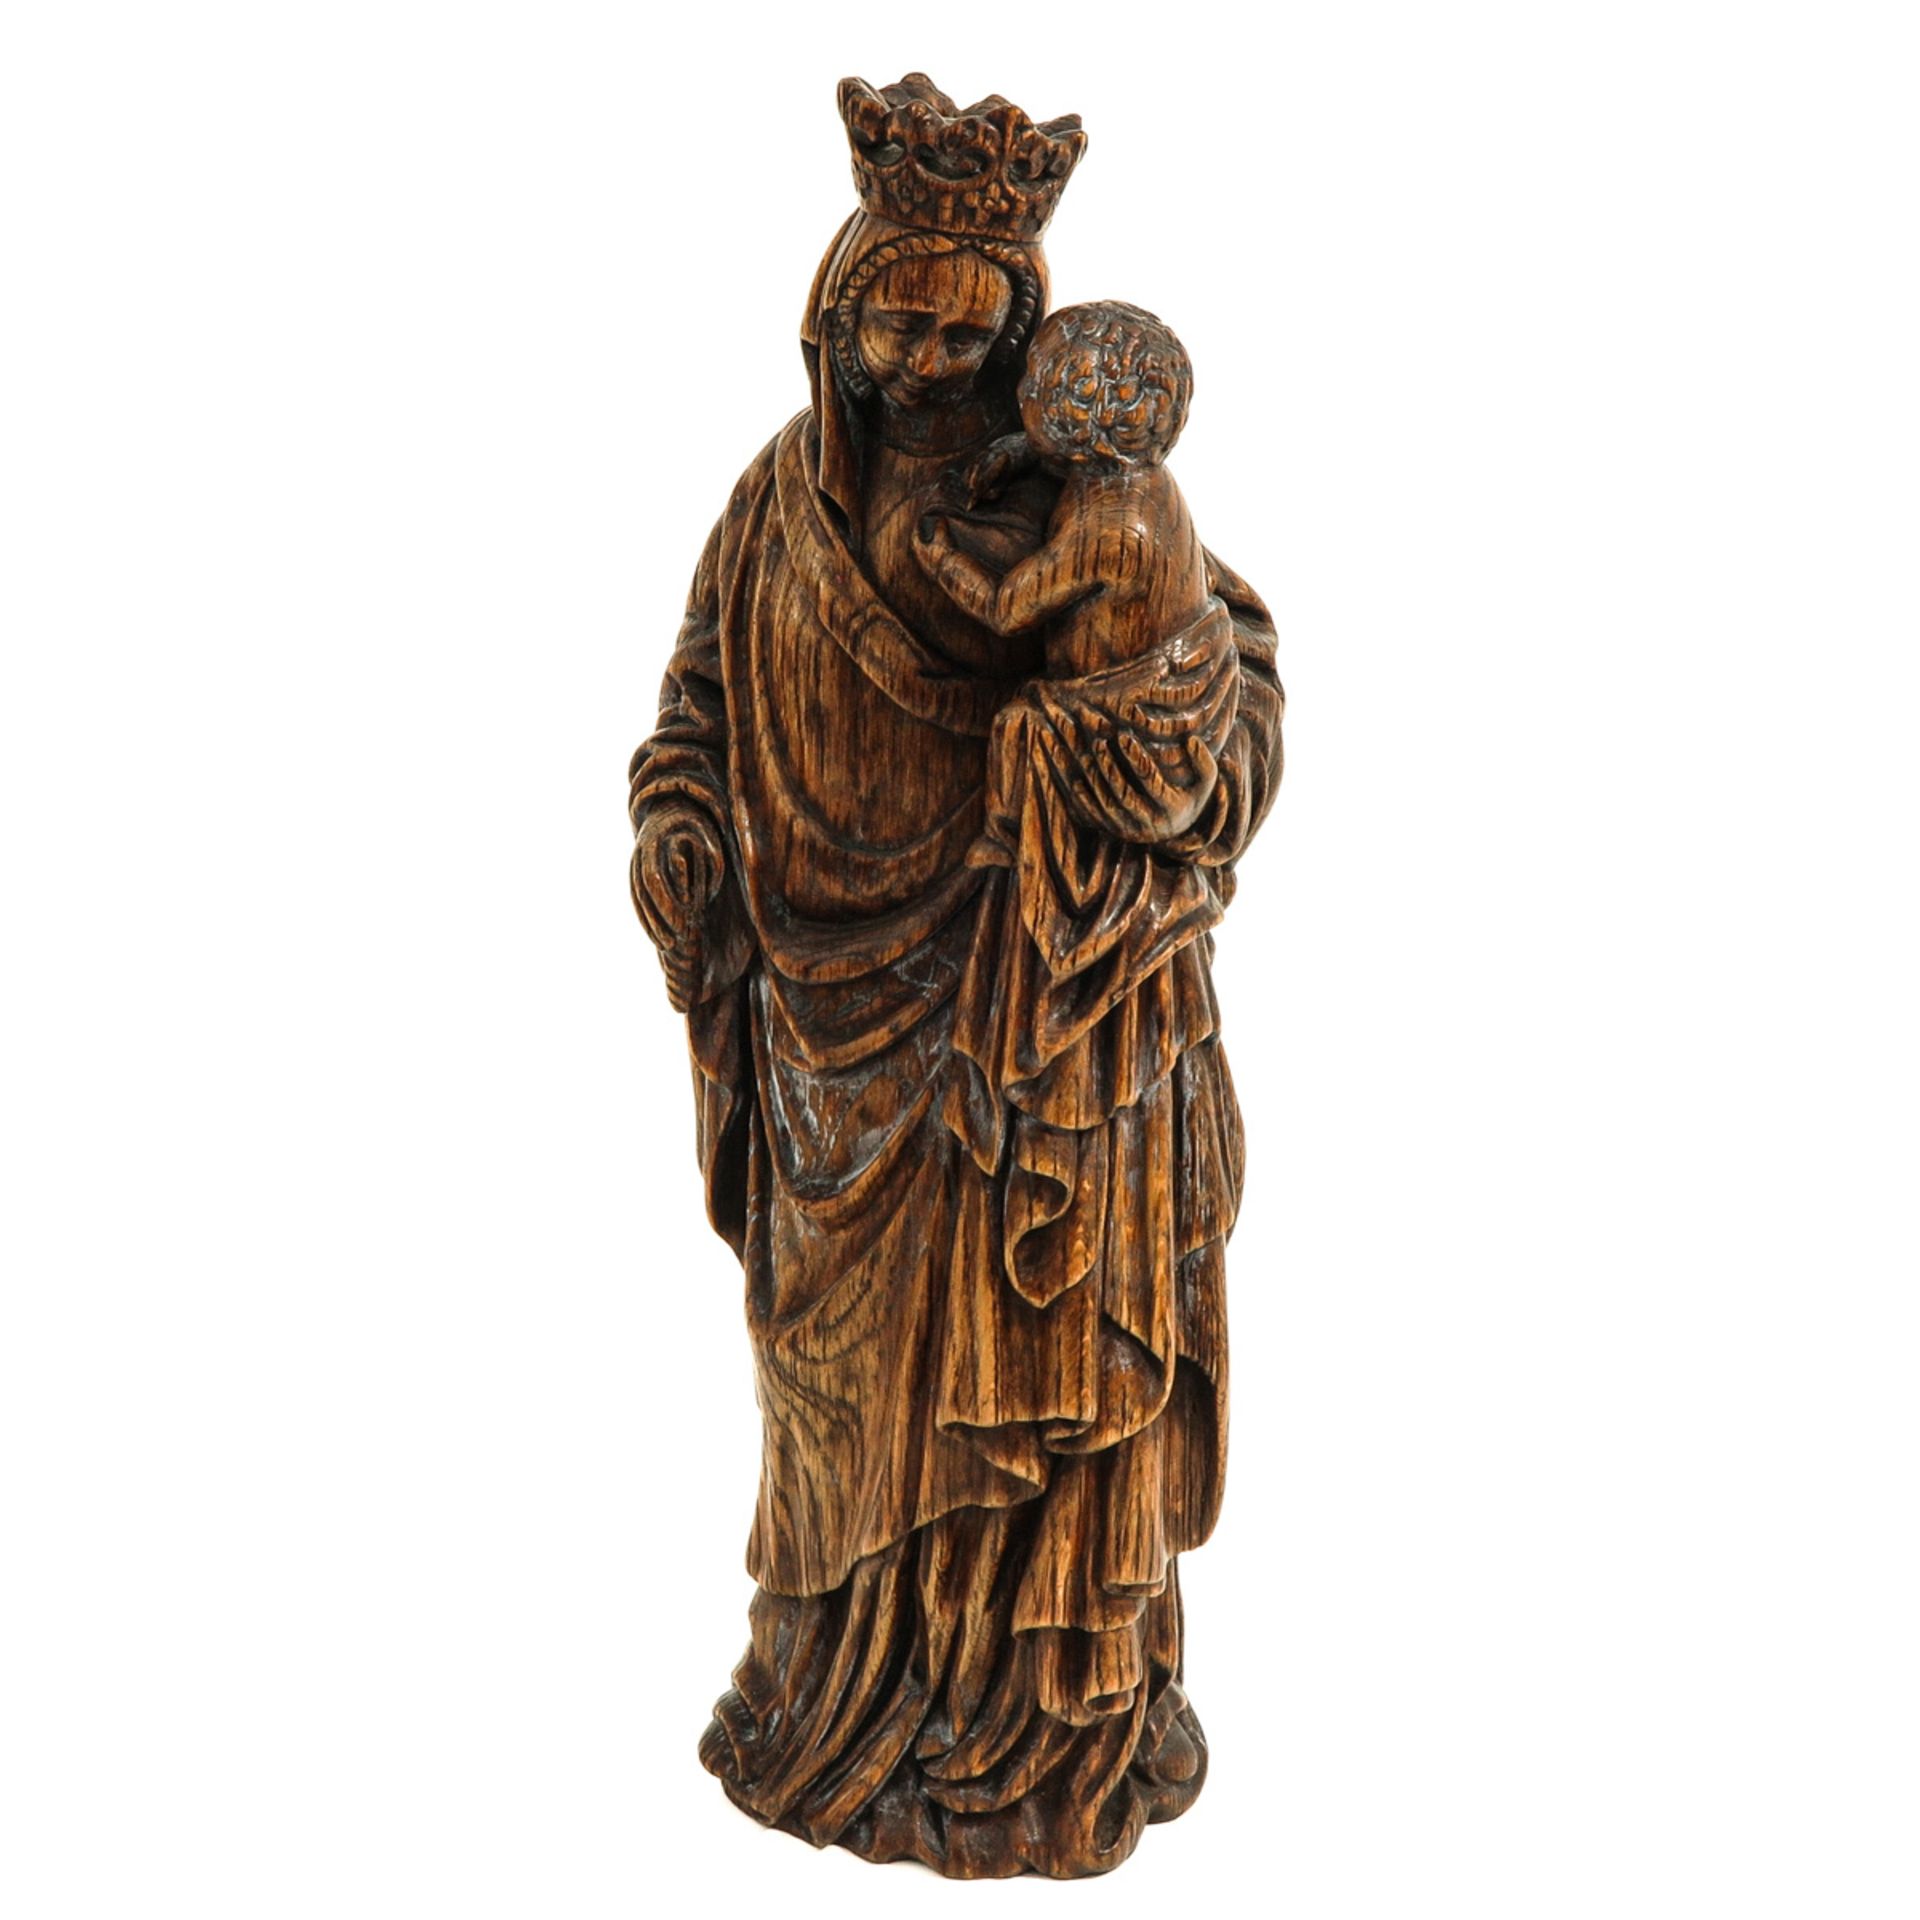 A Wood Sculpture of Madonna with Child